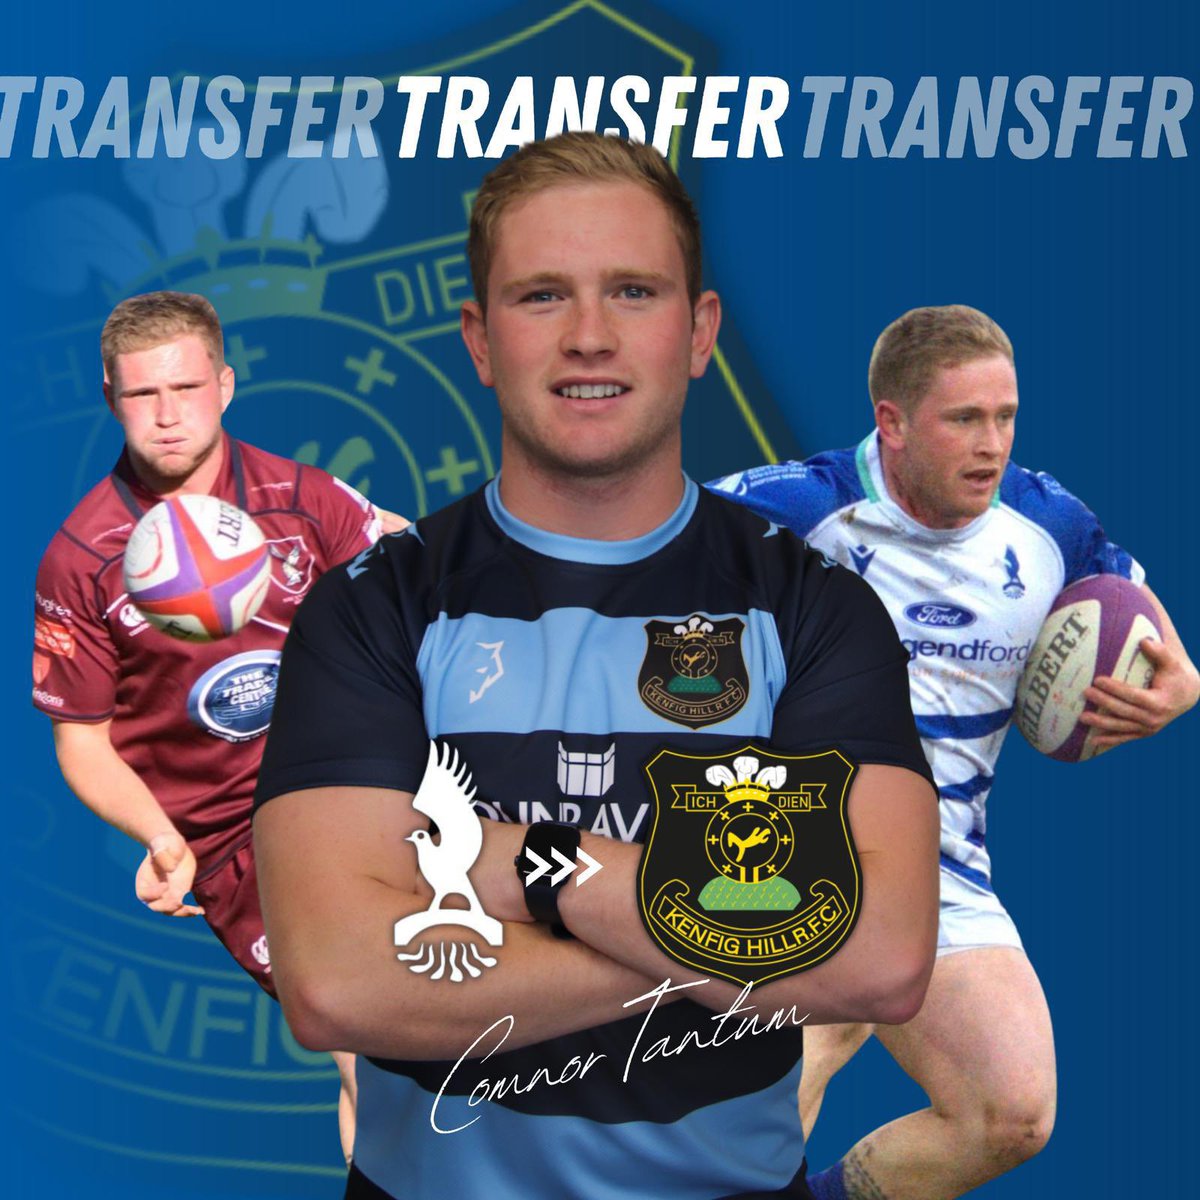 Transfer Announcement. We are delighted to announce the signing of @connor_tantum who is coming home to The Mules after playing numerous seasons for both @SwanseaRFC and @bridgendravens Class Player 👏👏 #HalaMules